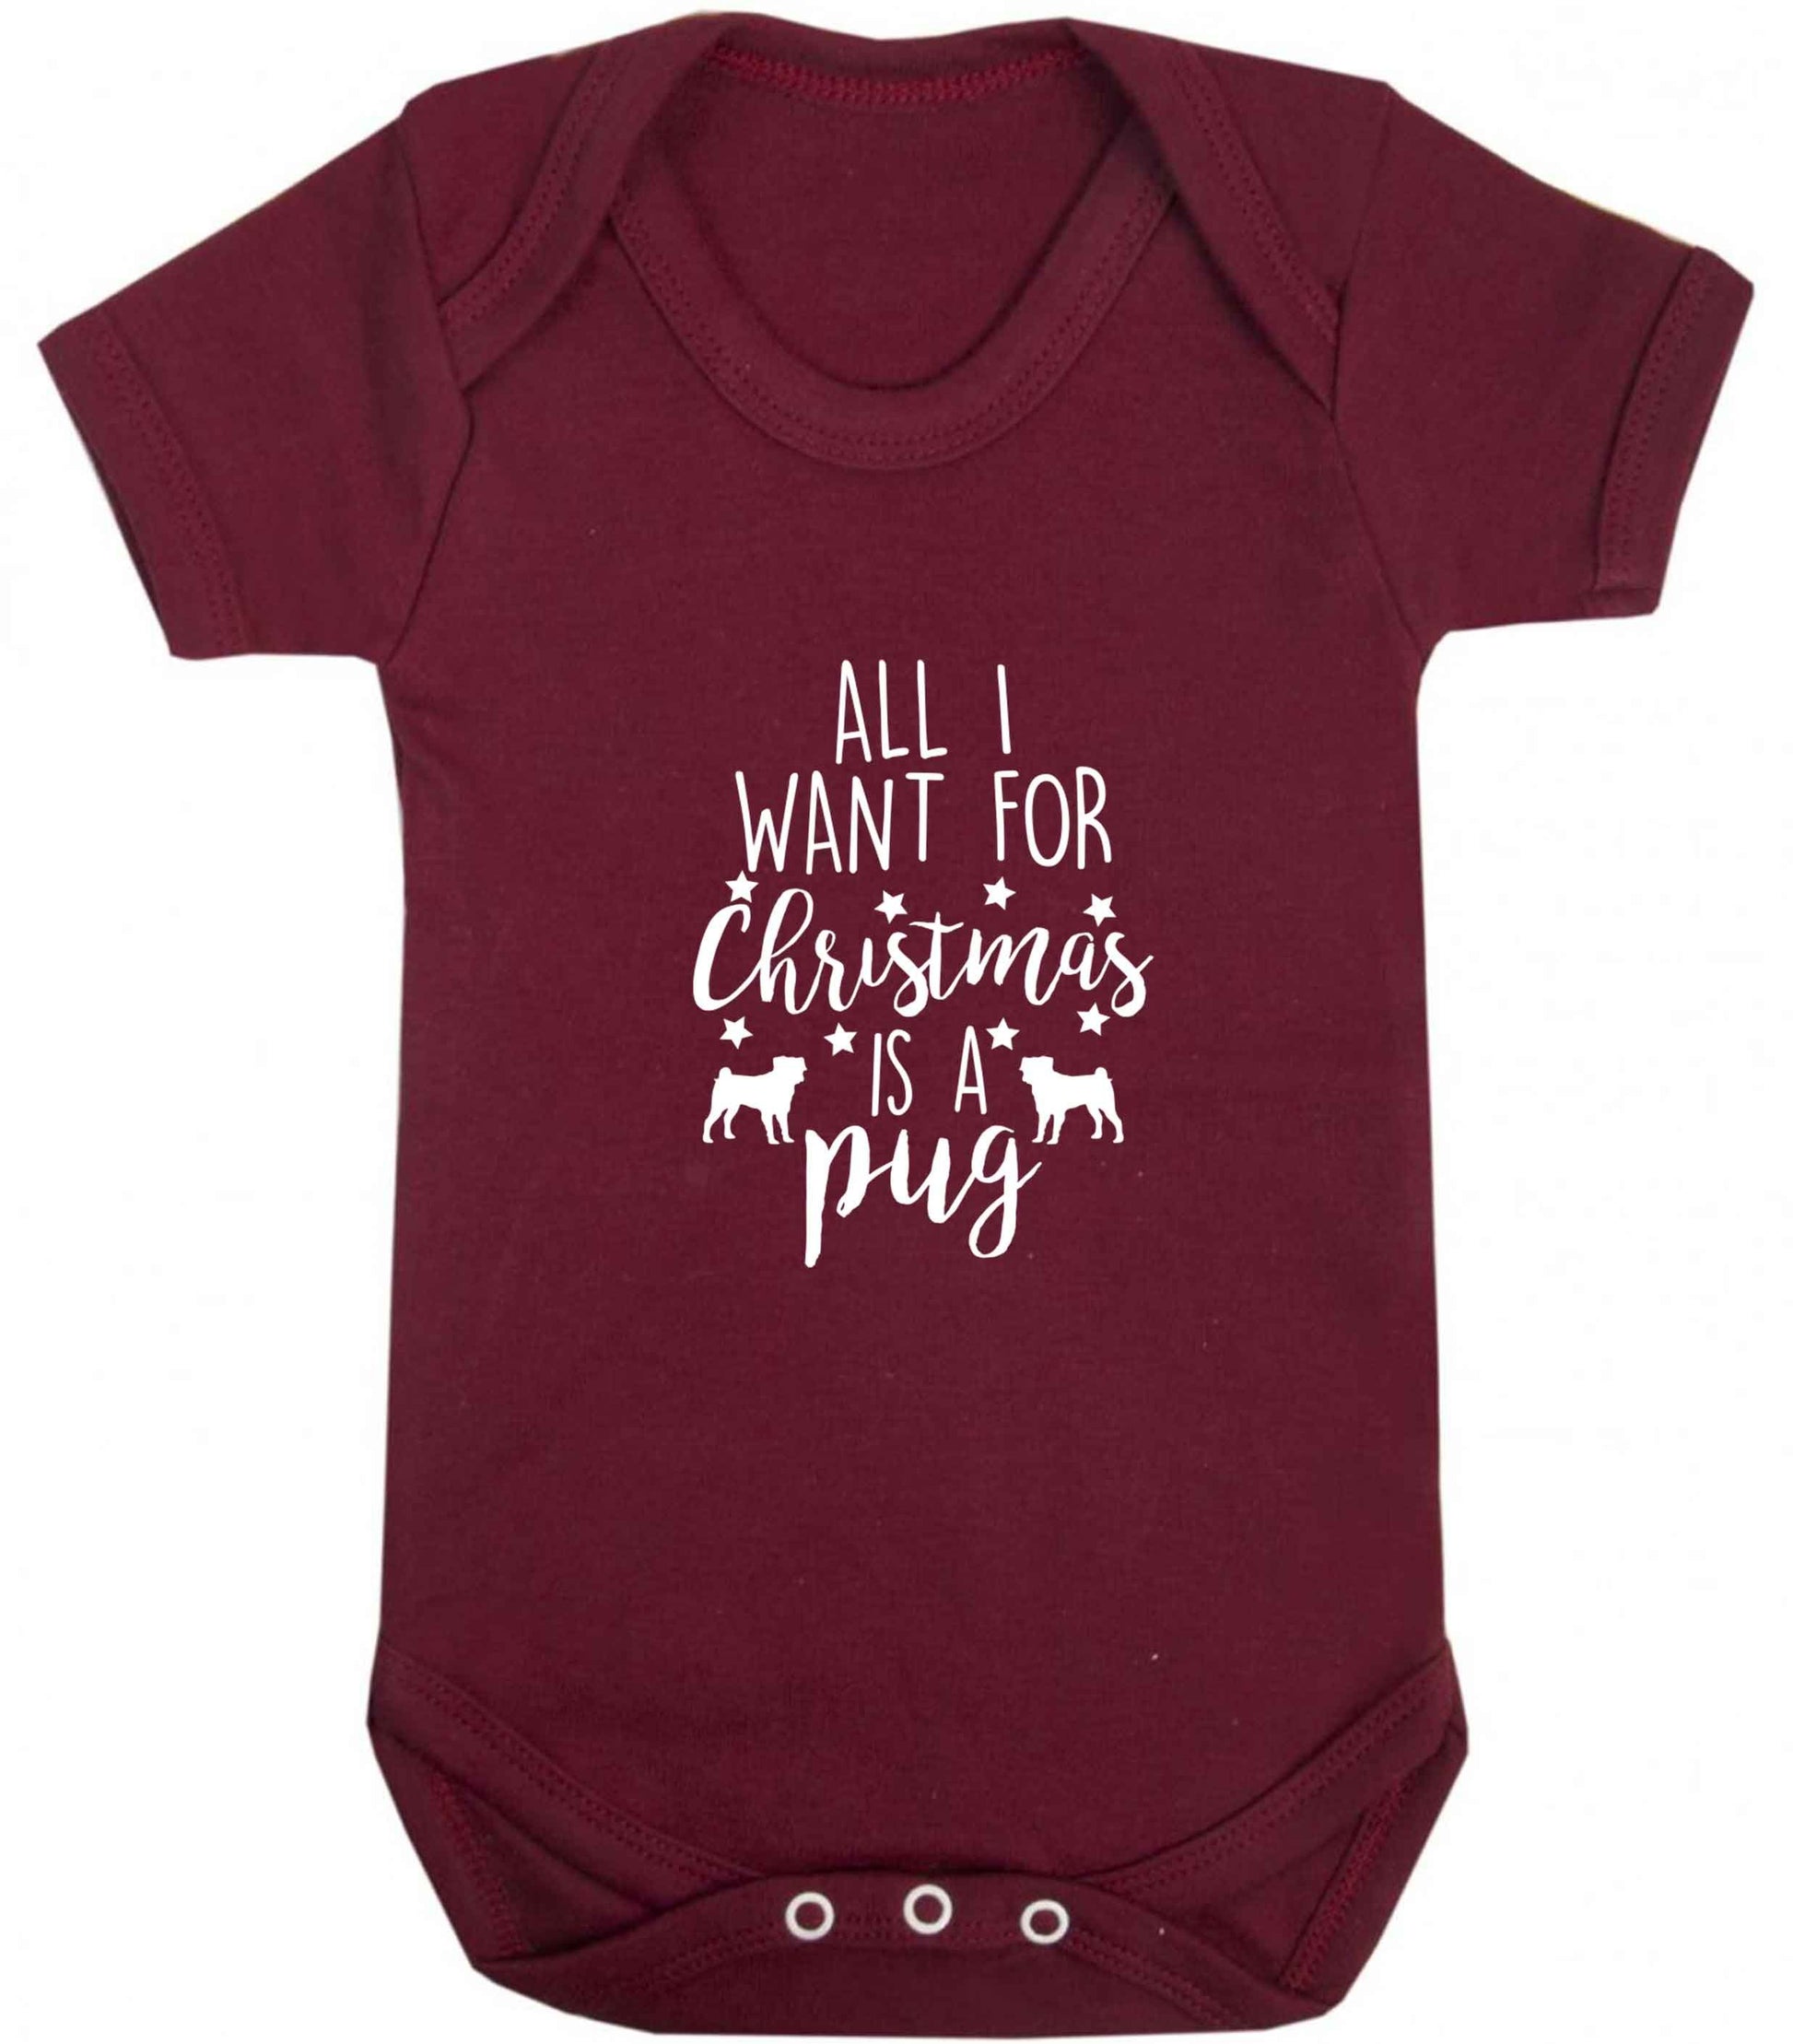 All I want for Christmas is a pug baby vest maroon 18-24 months